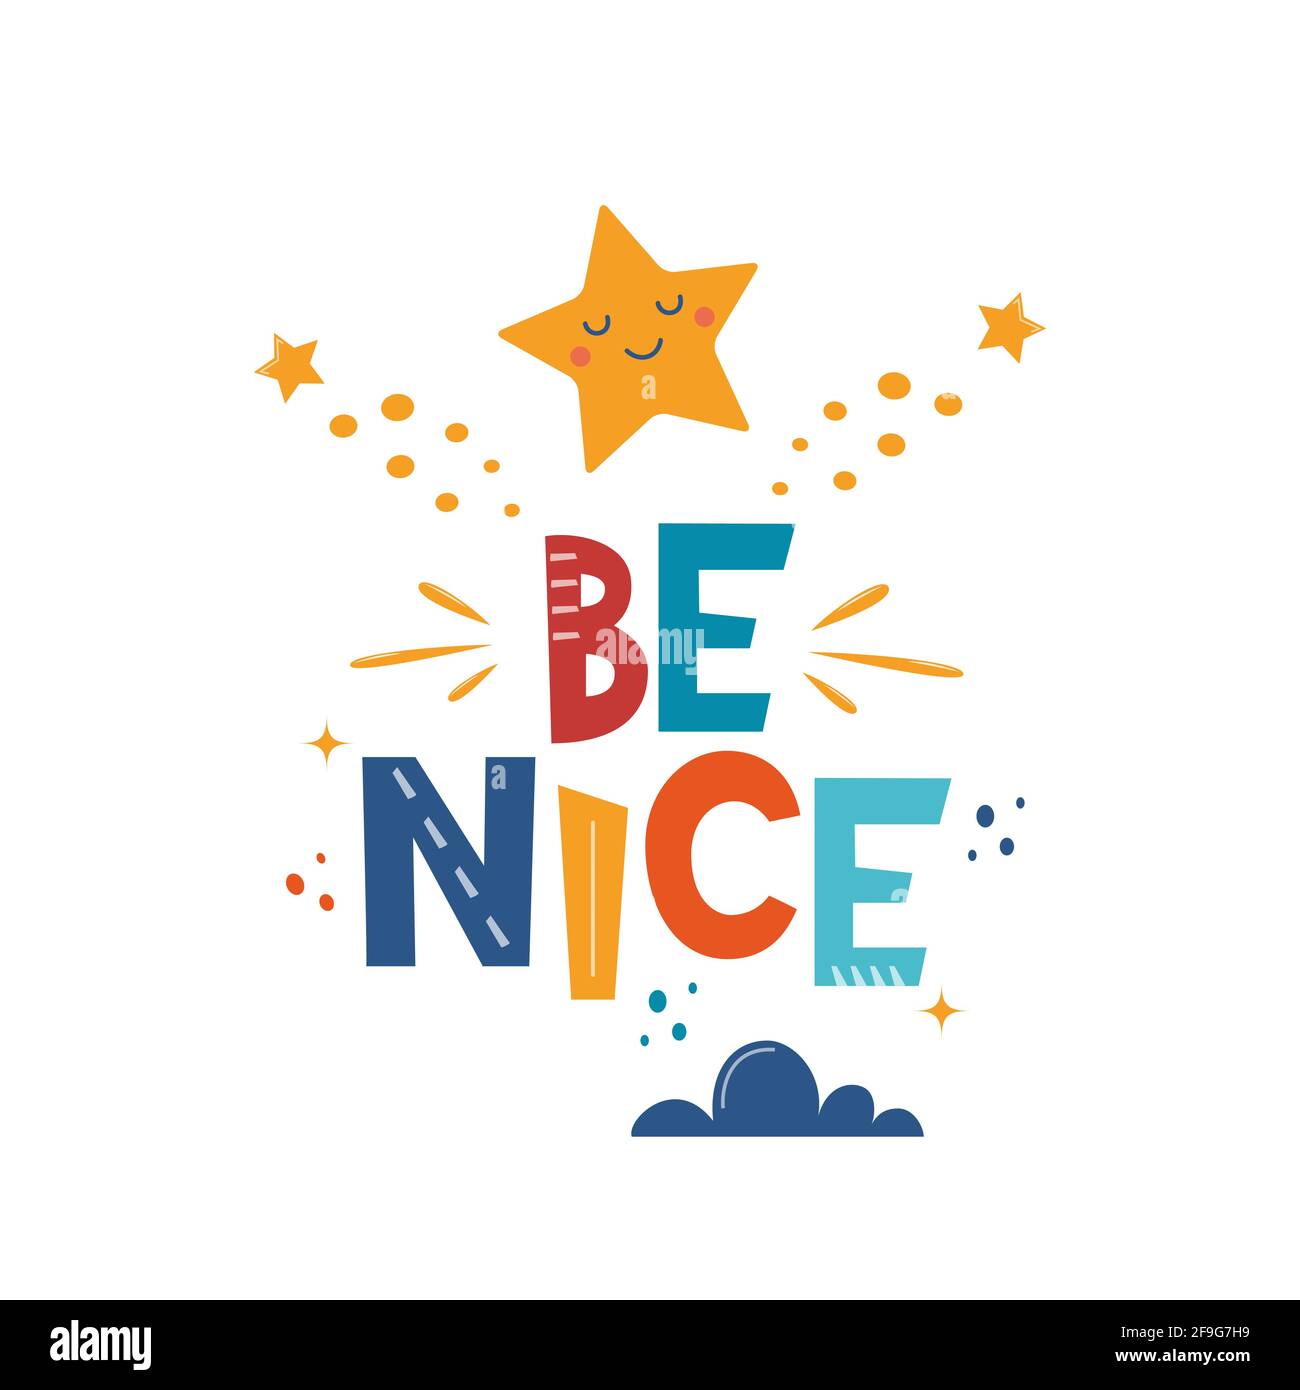 https://c8.alamy.com/comp/2F9G7H9/be-nice-hand-drawn-motivation-lettering-phrase-with-star-and-cloud-for-poster-logo-greeting-card-banner-cute-cartoon-print-childrens-room-decor-2F9G7H9.jpg